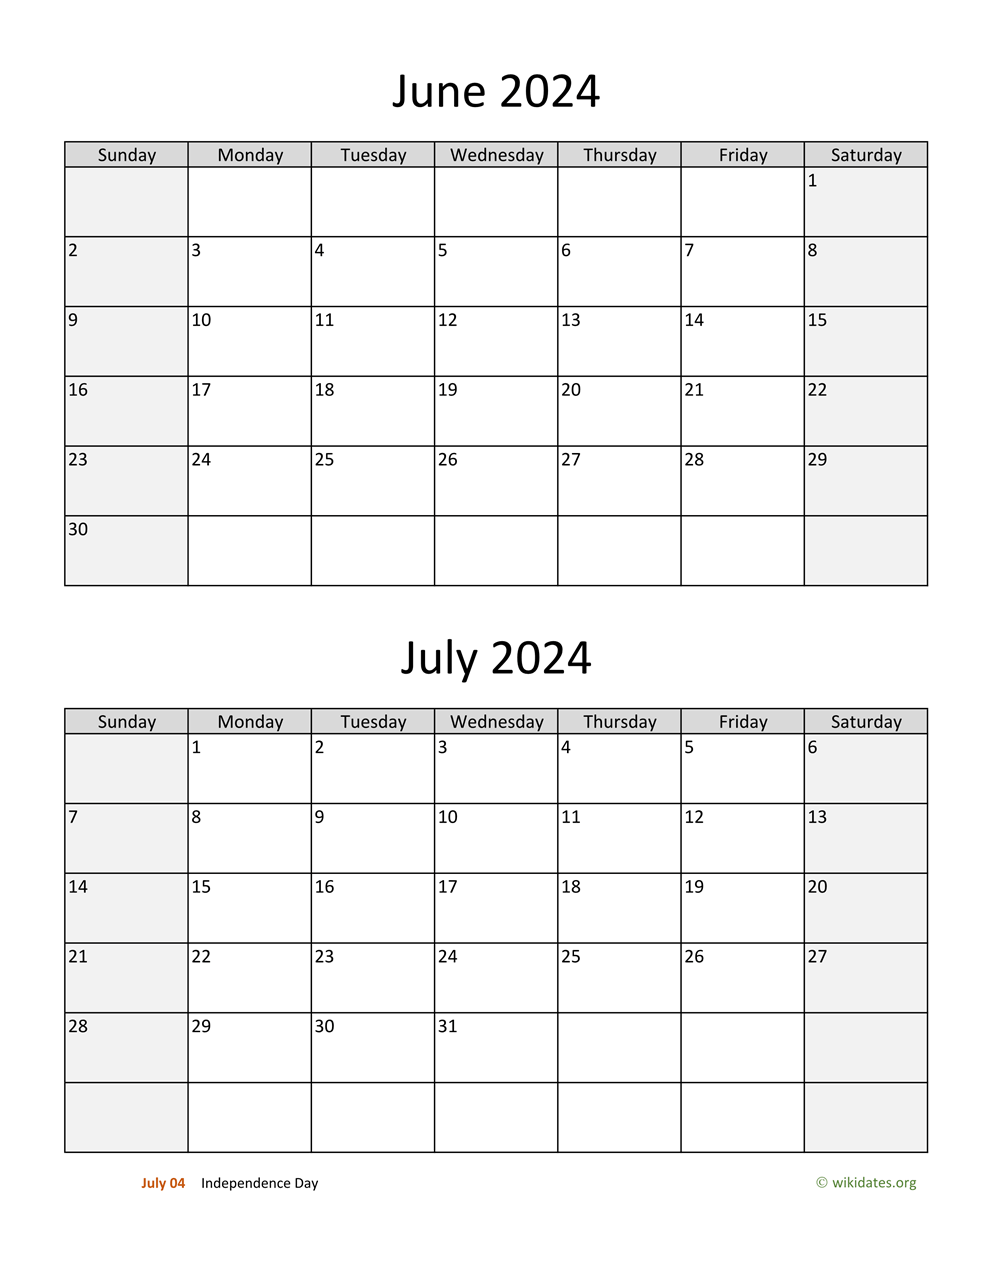 June And July 2024 Calendar | Wikidates for Free Printable June And July Calendar 2024